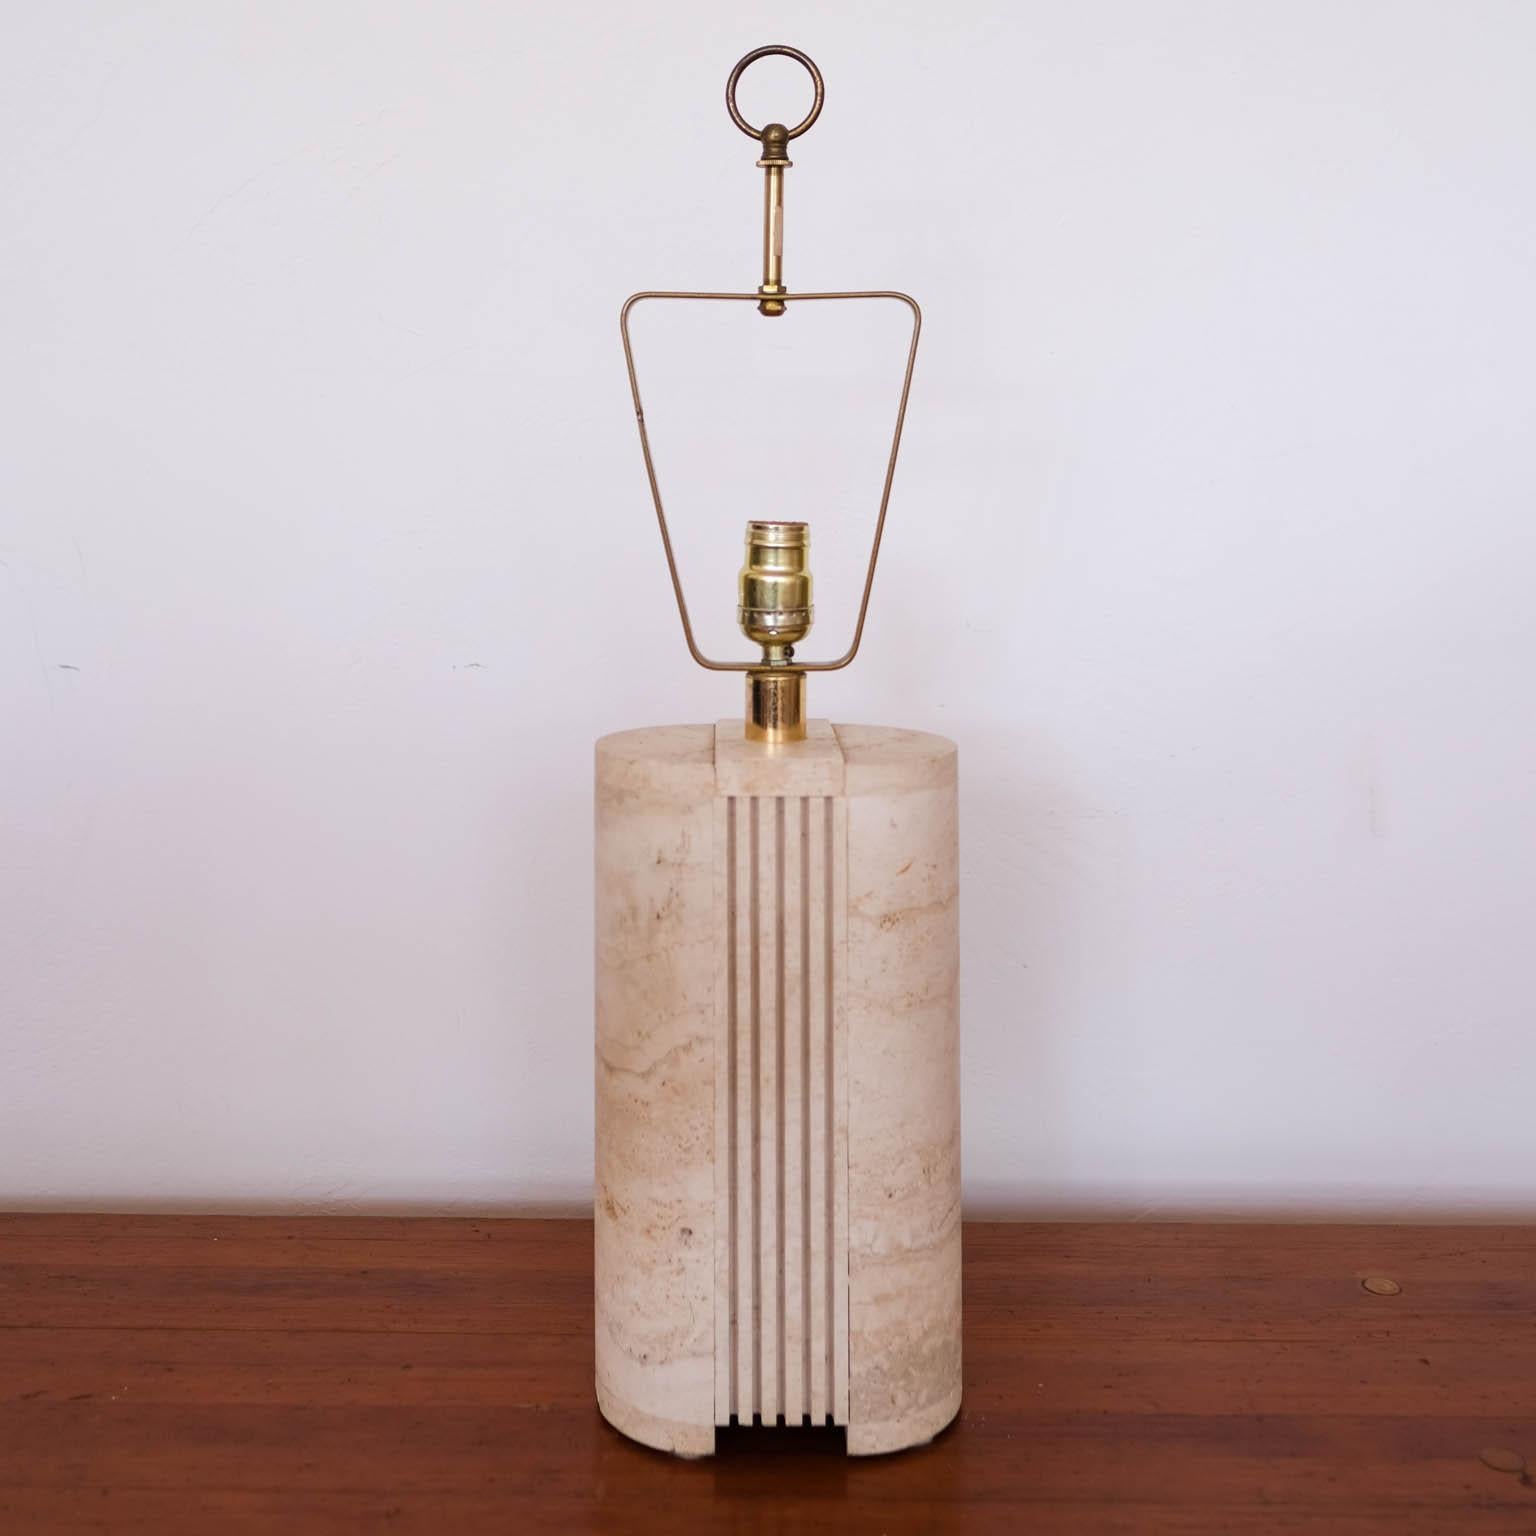 Travertine table lamp by Fratelli Manelli. Includes brass hardware. Inline dimmer switch. Shade is for display only. Italy, 1970s.